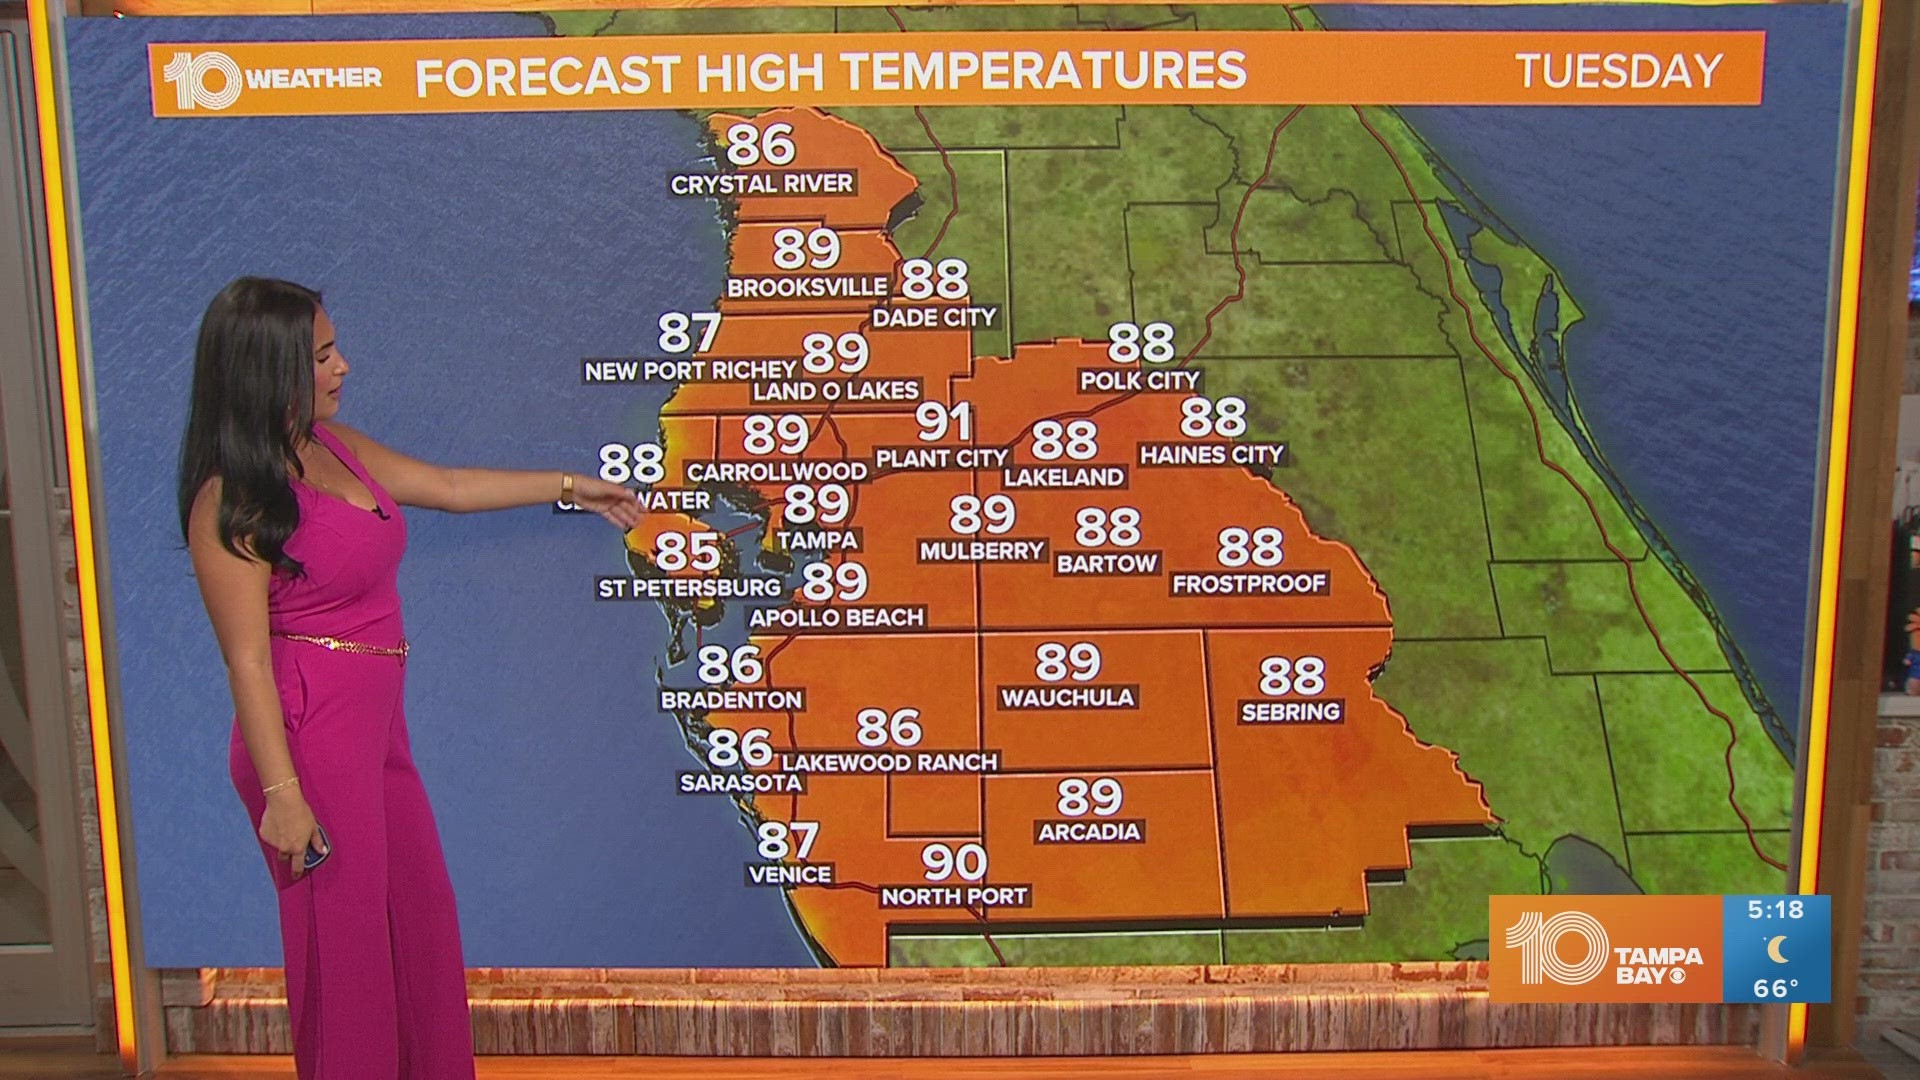 10 Tampa Bay meteorologist Amanda Pappas has today's forecast, showing Tampa Bay getting closer to that summer warm-up weather.